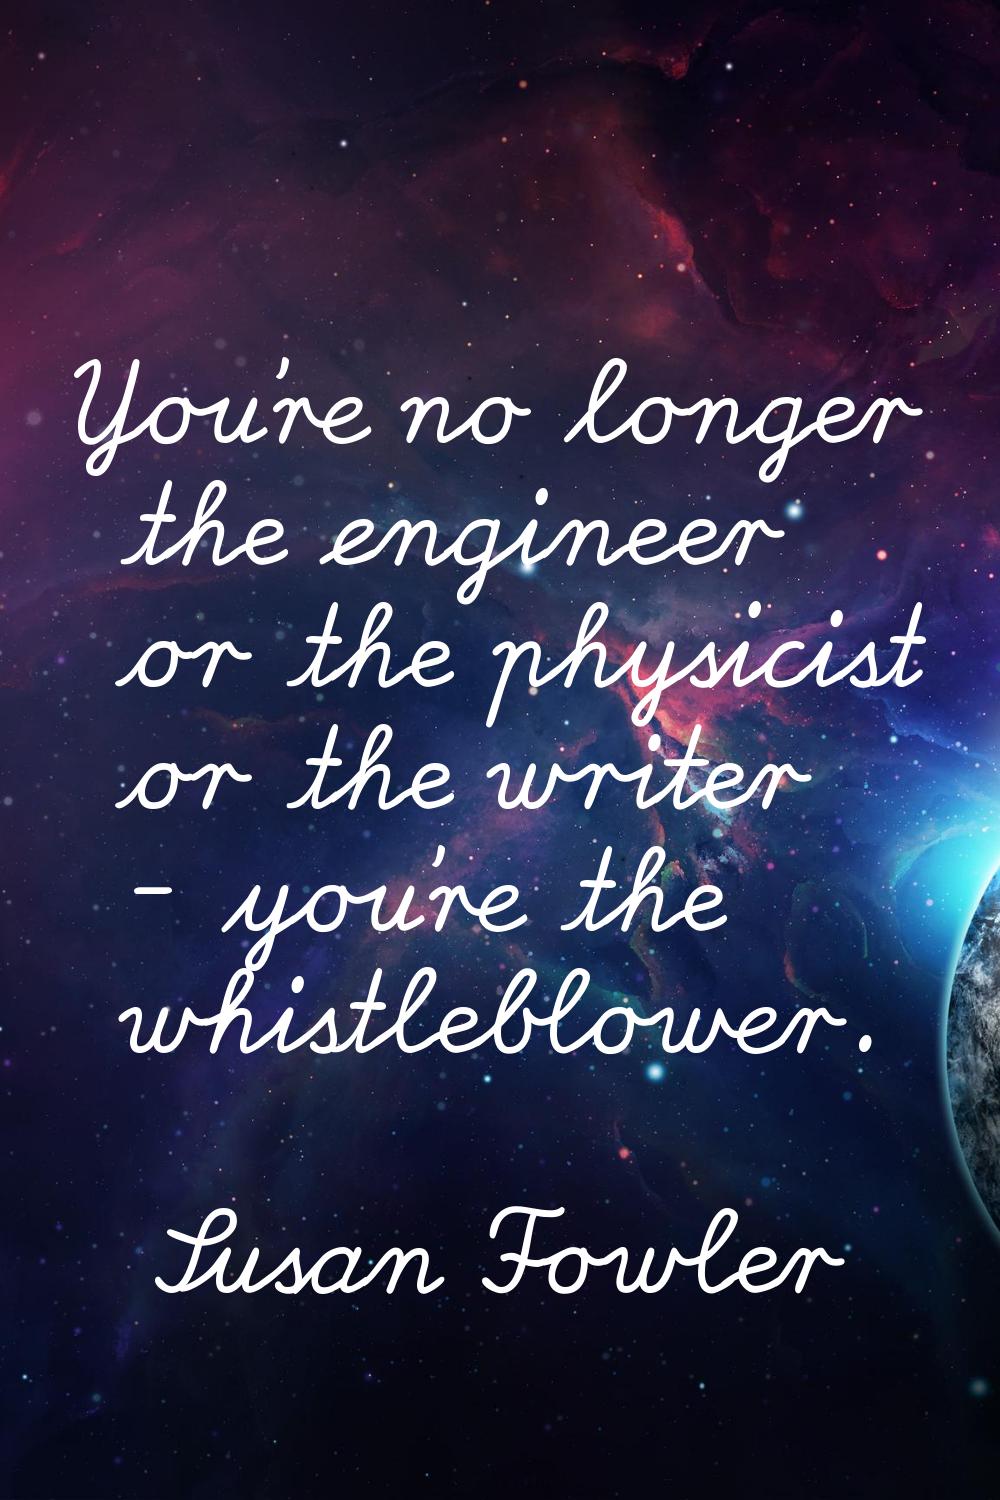 You're no longer the engineer or the physicist or the writer - you're the whistleblower.